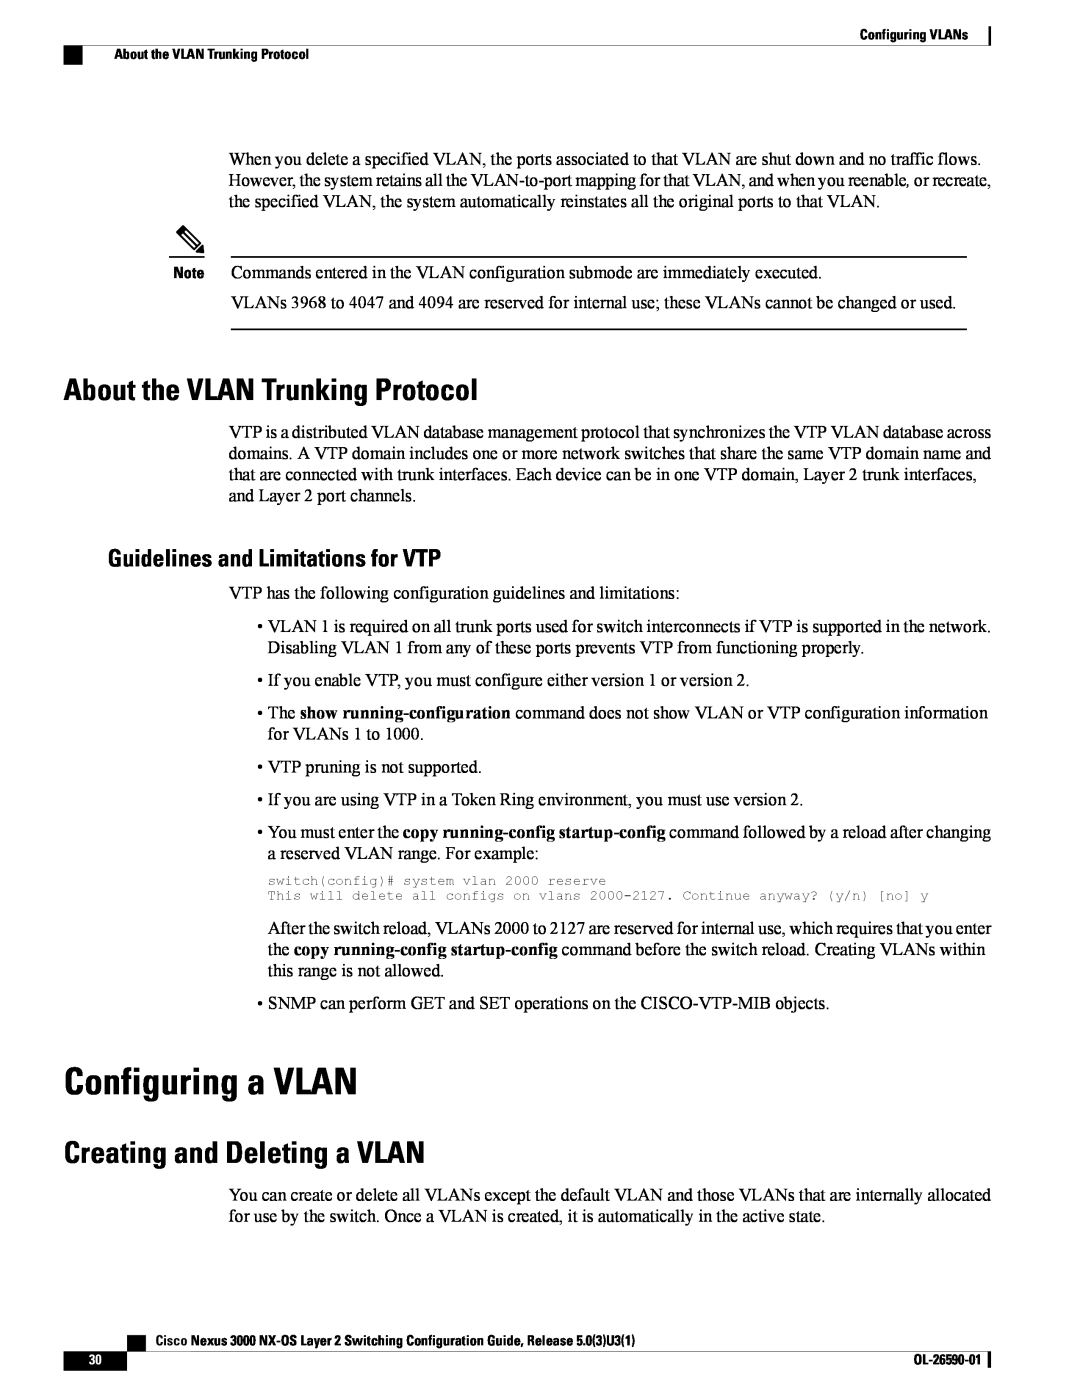 Cisco Systems N3KC3048TP1GE manual Configuring a VLAN, About the VLAN Trunking Protocol, Creating and Deleting a VLAN 